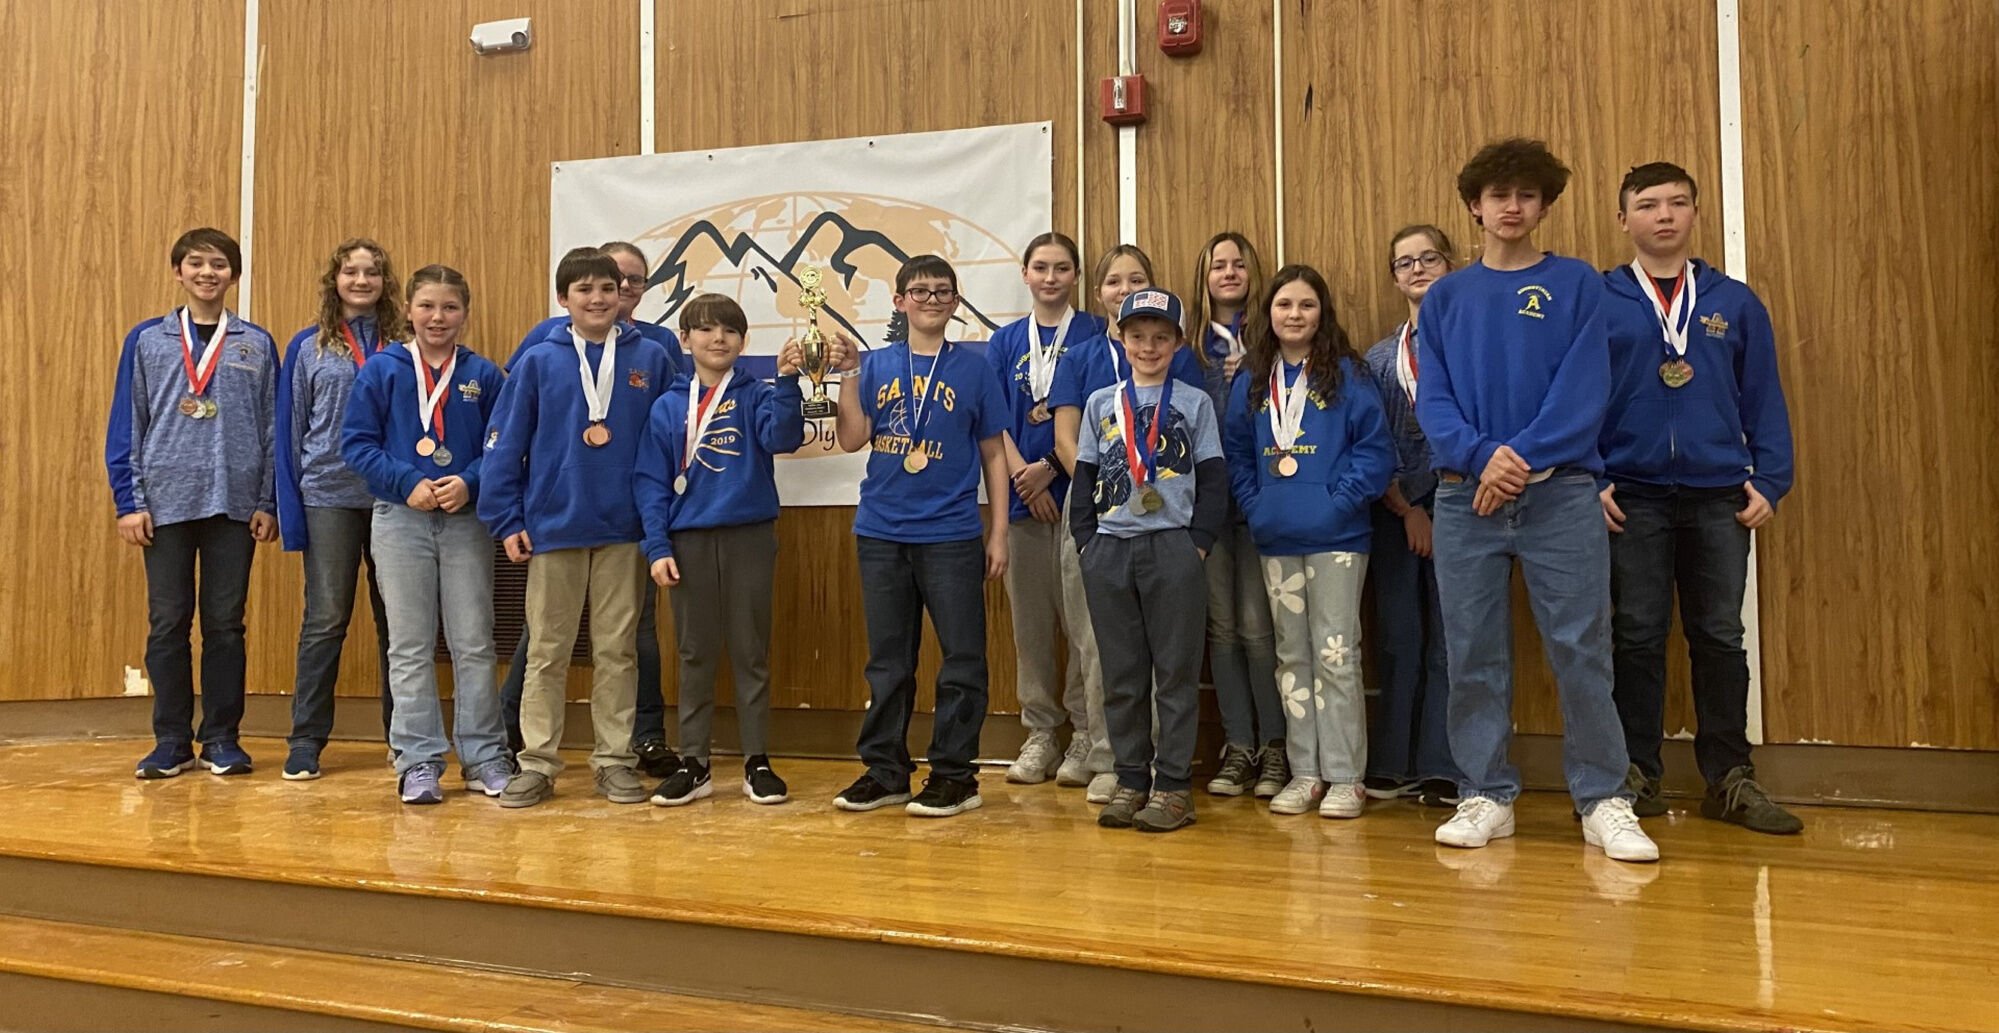 Augustinian Academy Earns Third Place at the Regional Science Olympiad